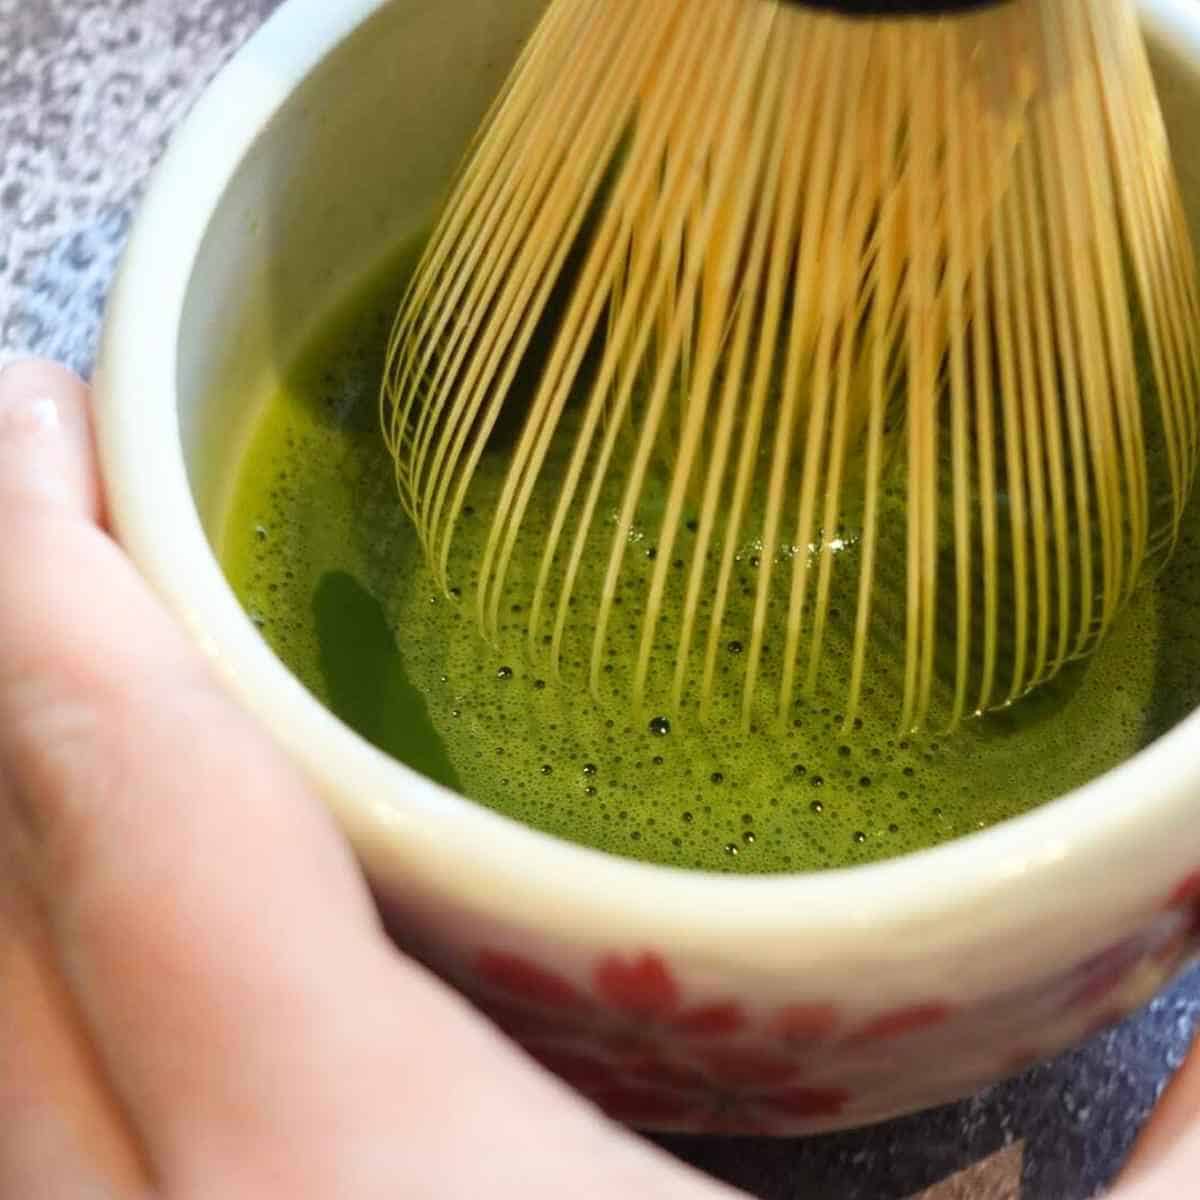 Foamy top from whisking Japanese green tea